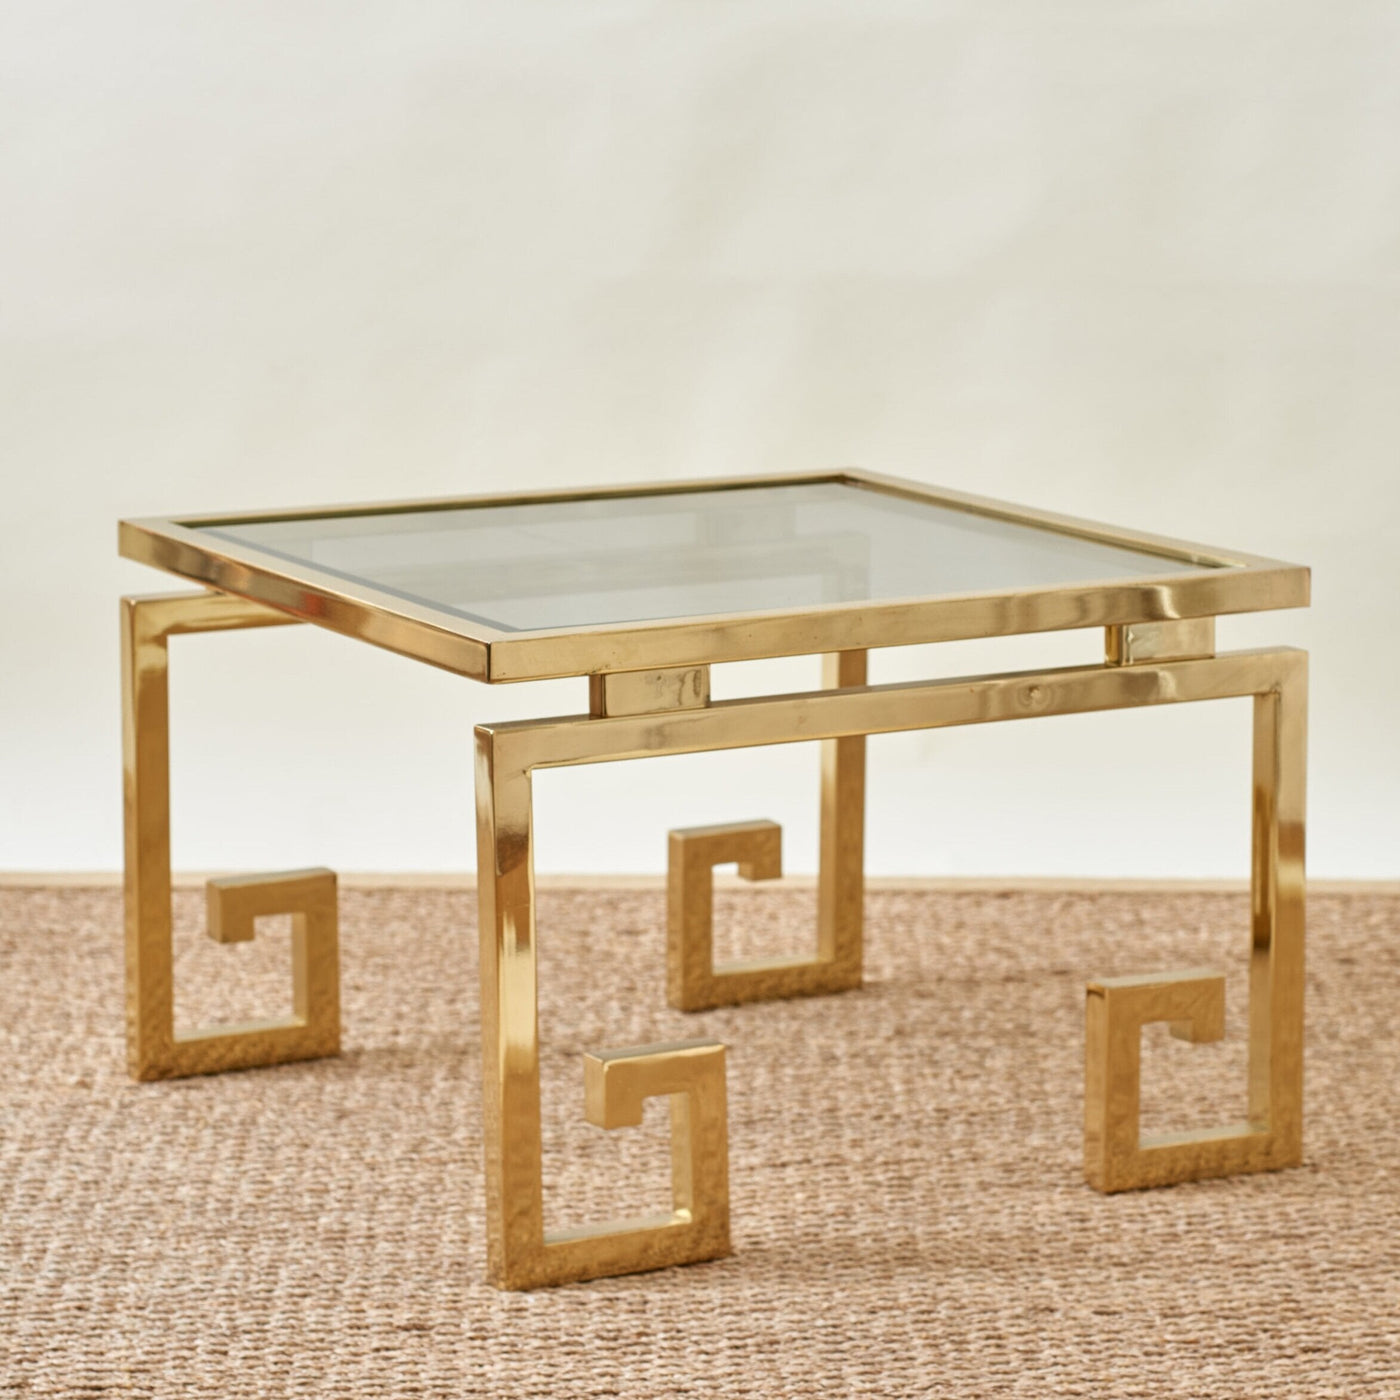 Greek Key Table With Glass